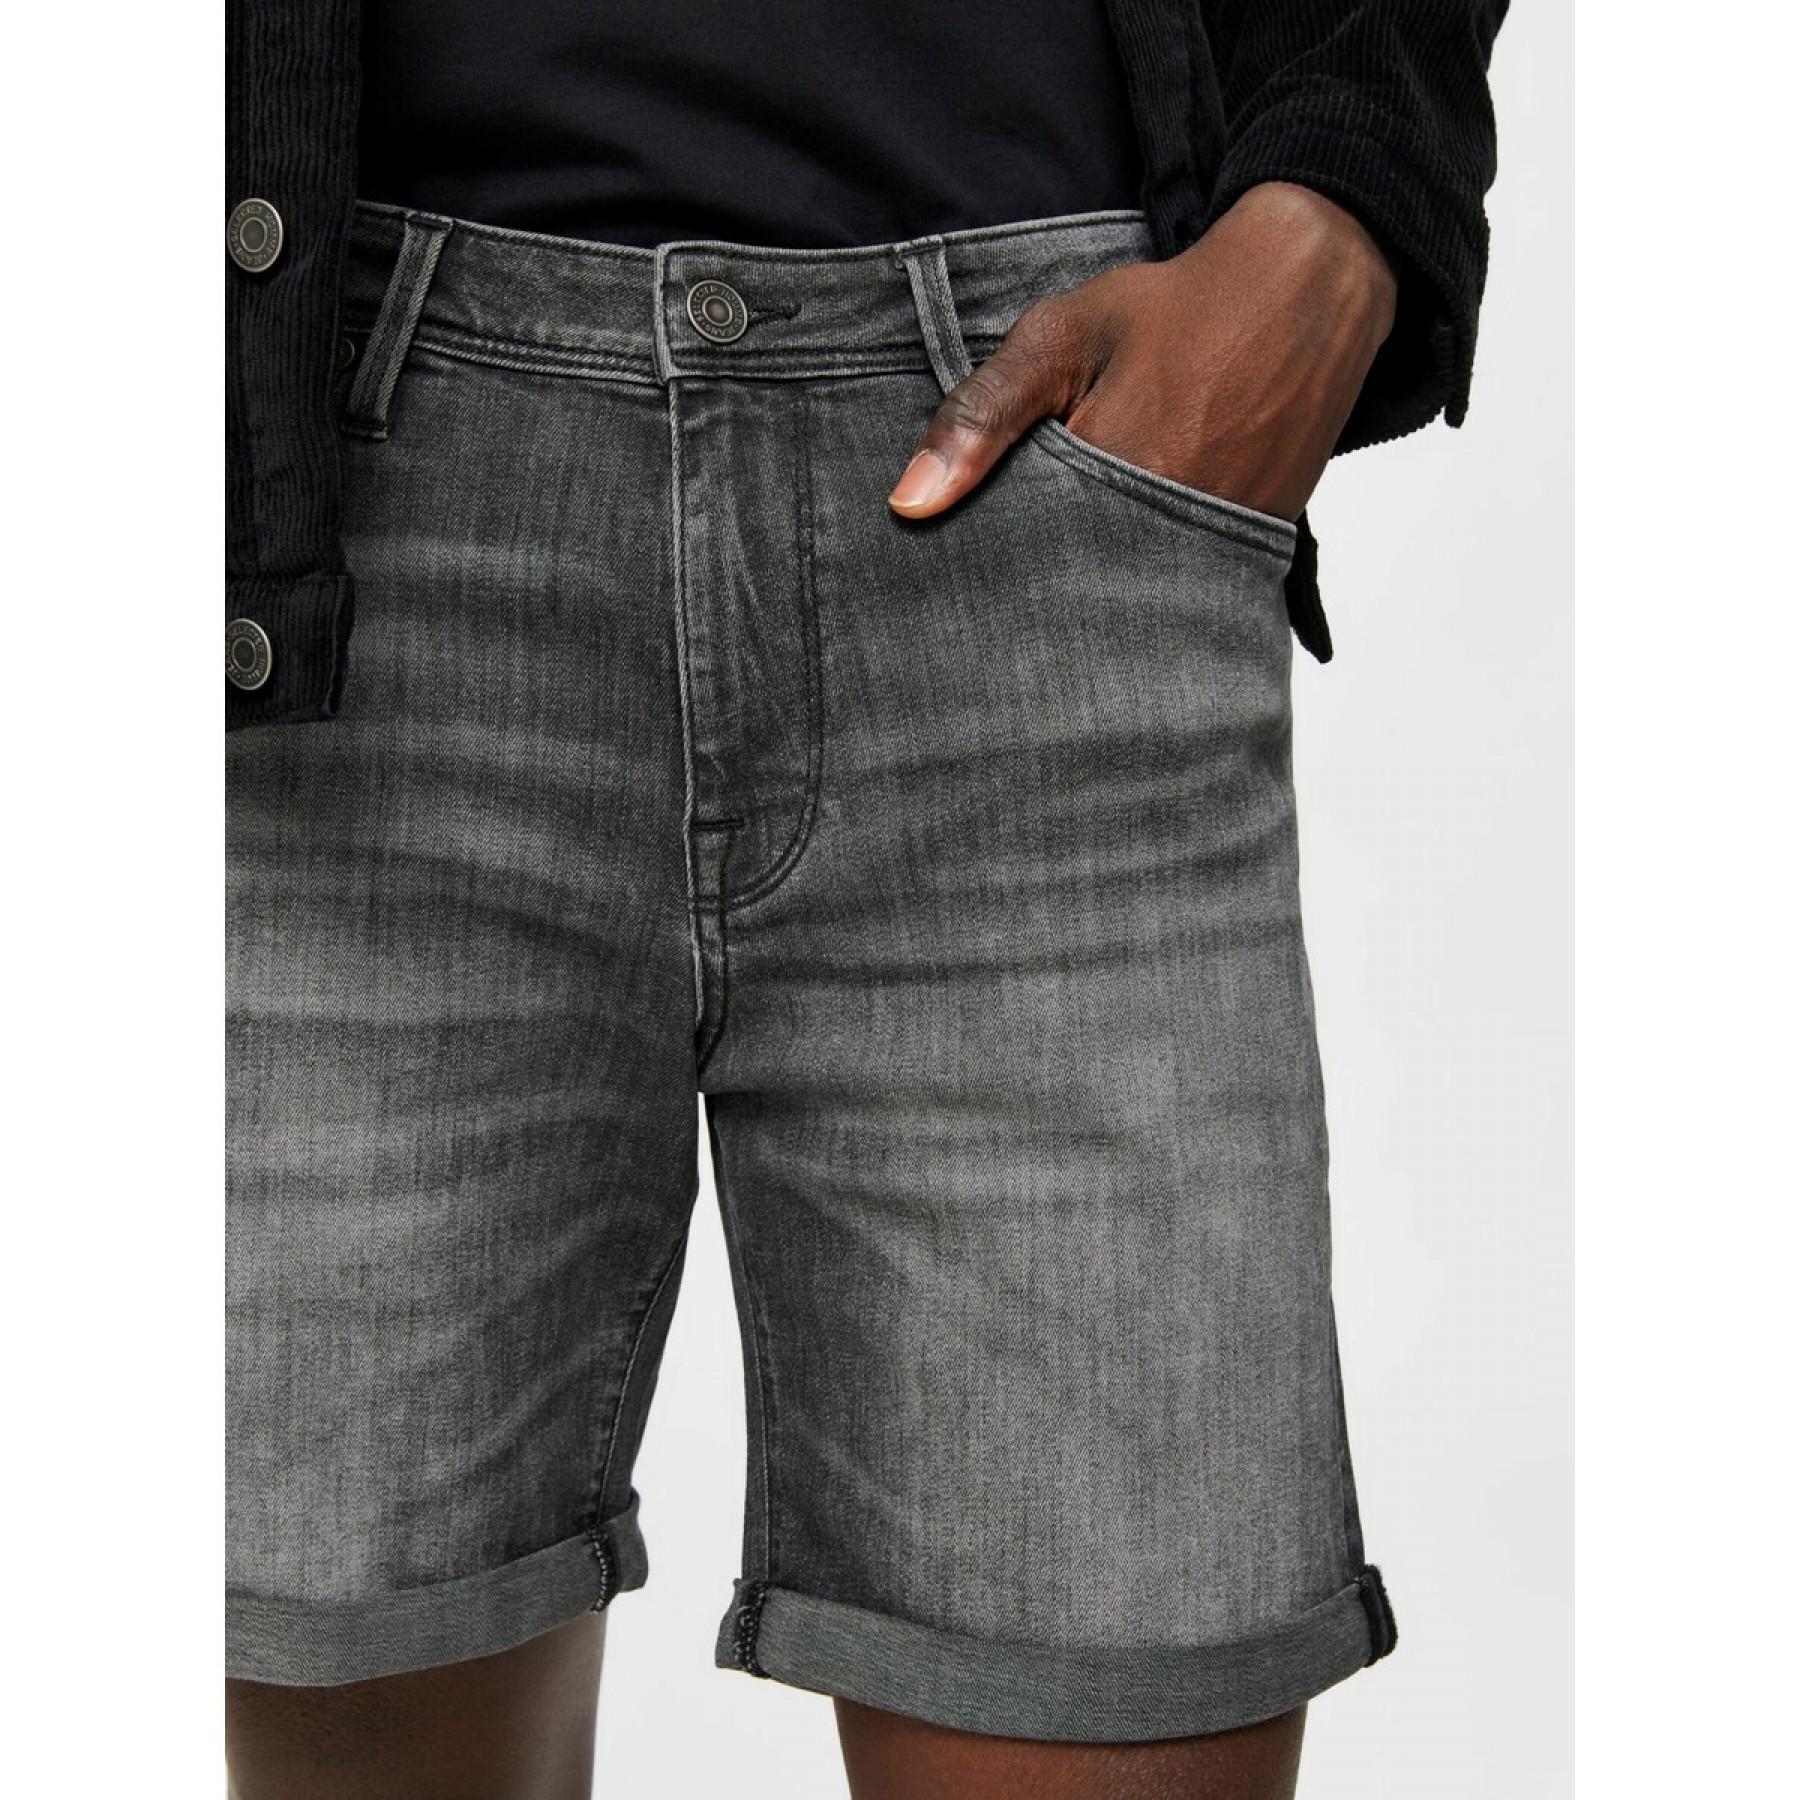 Jeansshorts Selected Alex 334